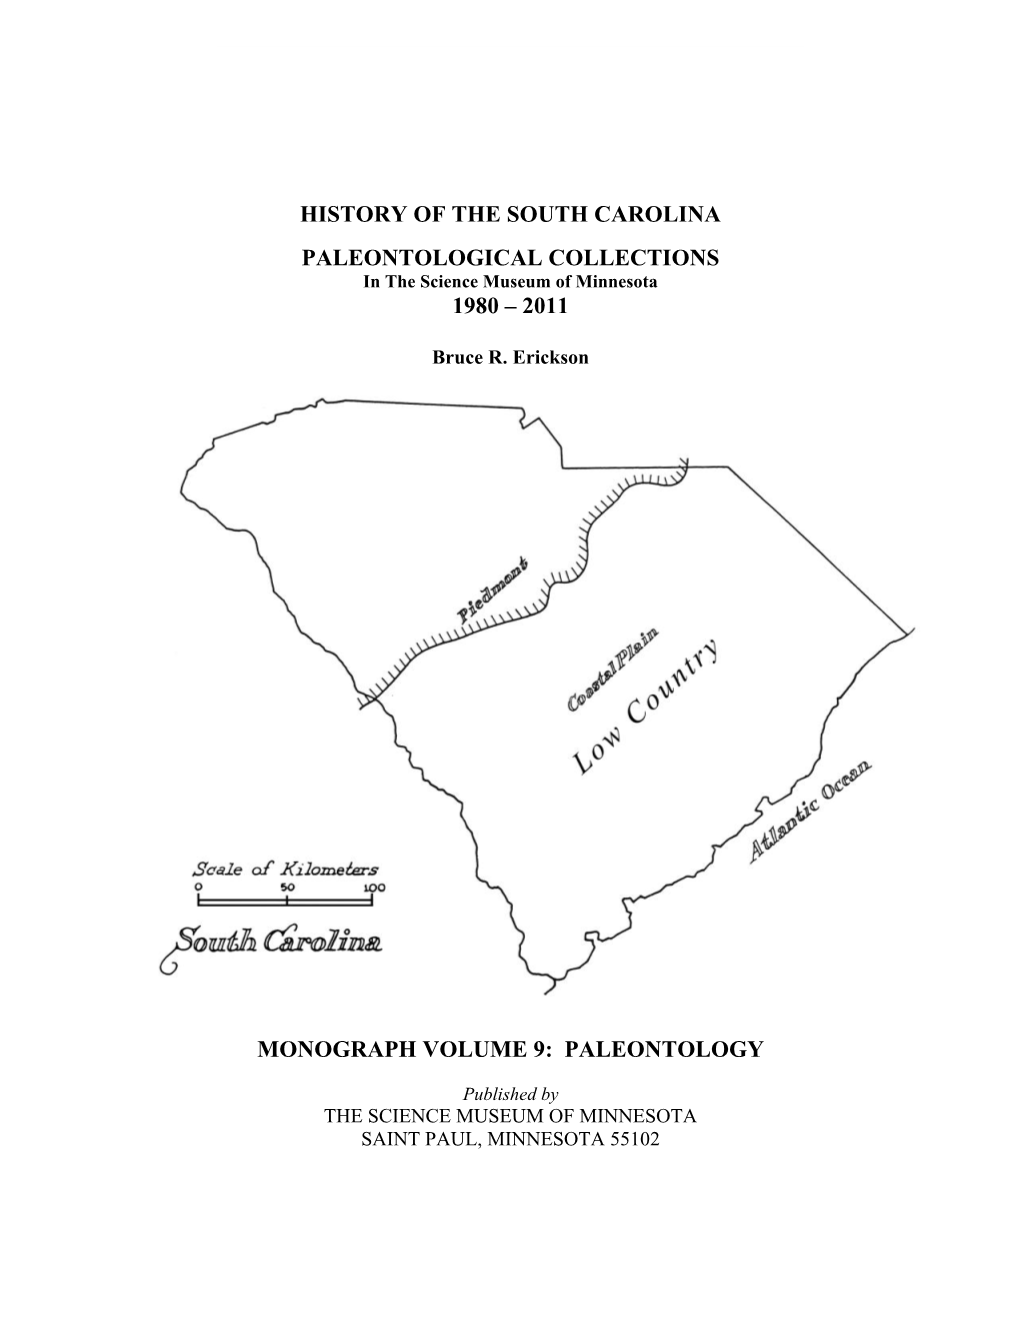 HISTORY of the SOUTH CAROLINA PALEONTOLOGICAL COLLECTIONS in the Science Museum of Minnesota 1980 – 2011